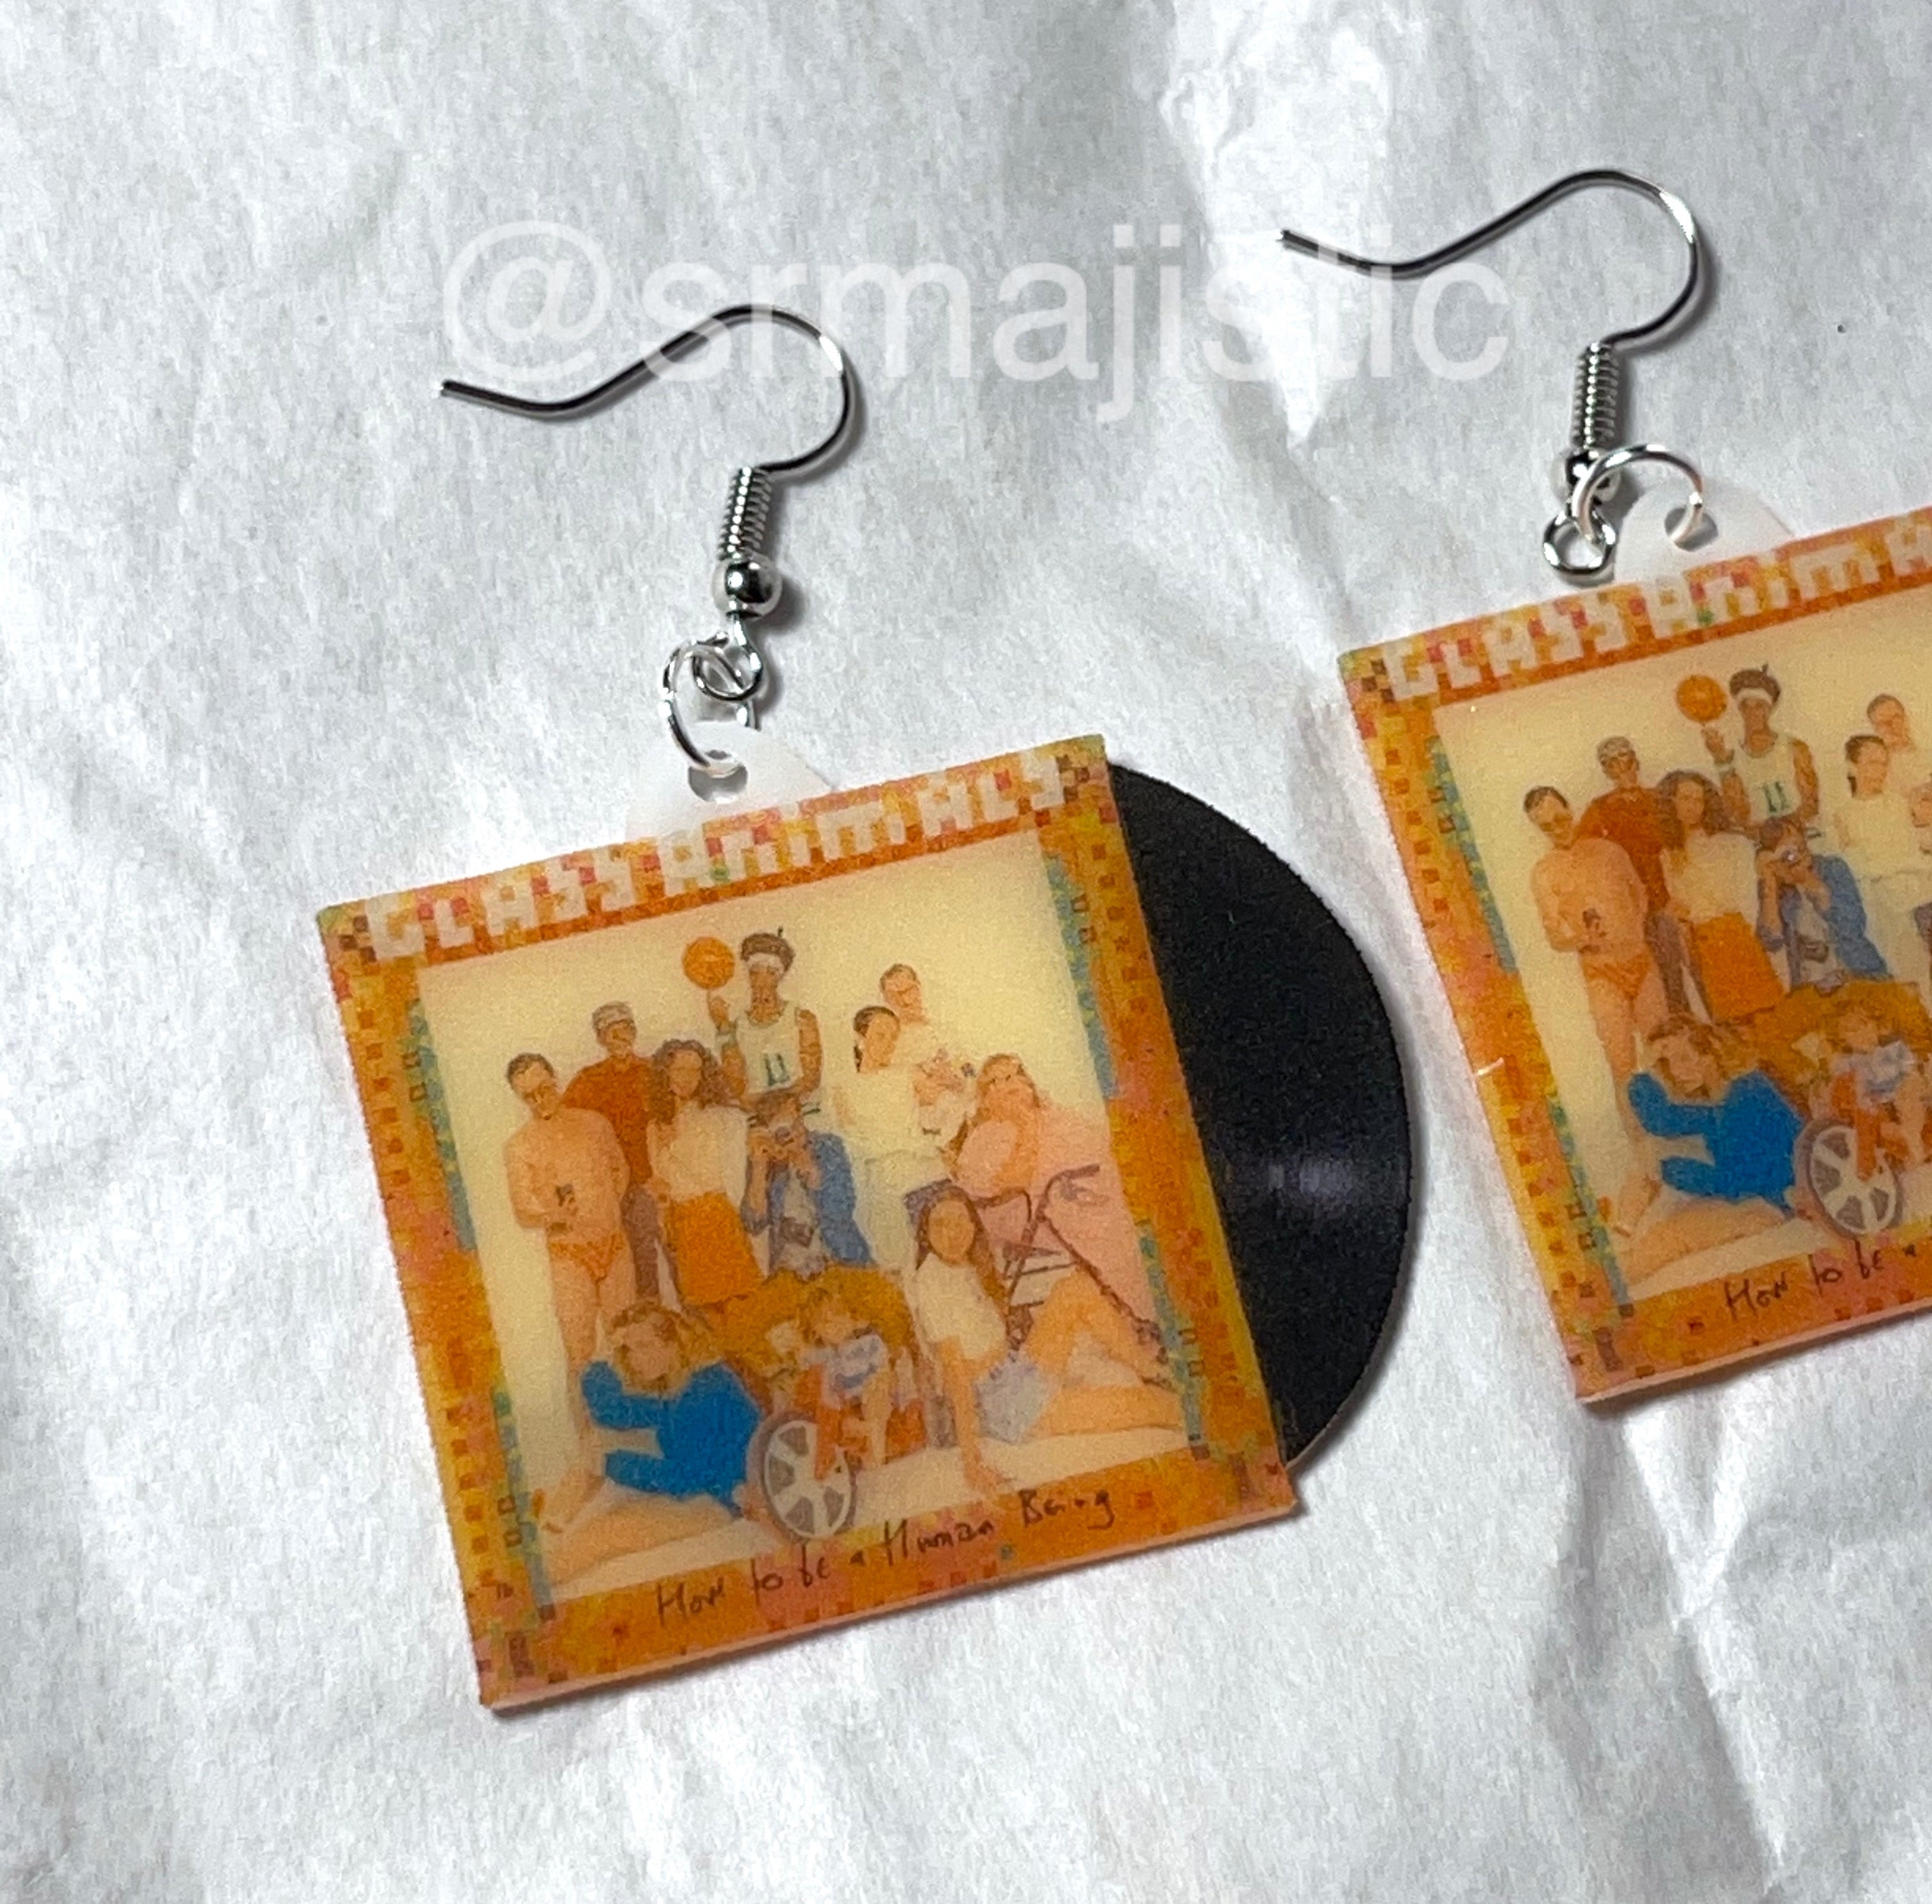 Glass Animals How to Be a Human Being Vinyl Album Handmade Earrings!